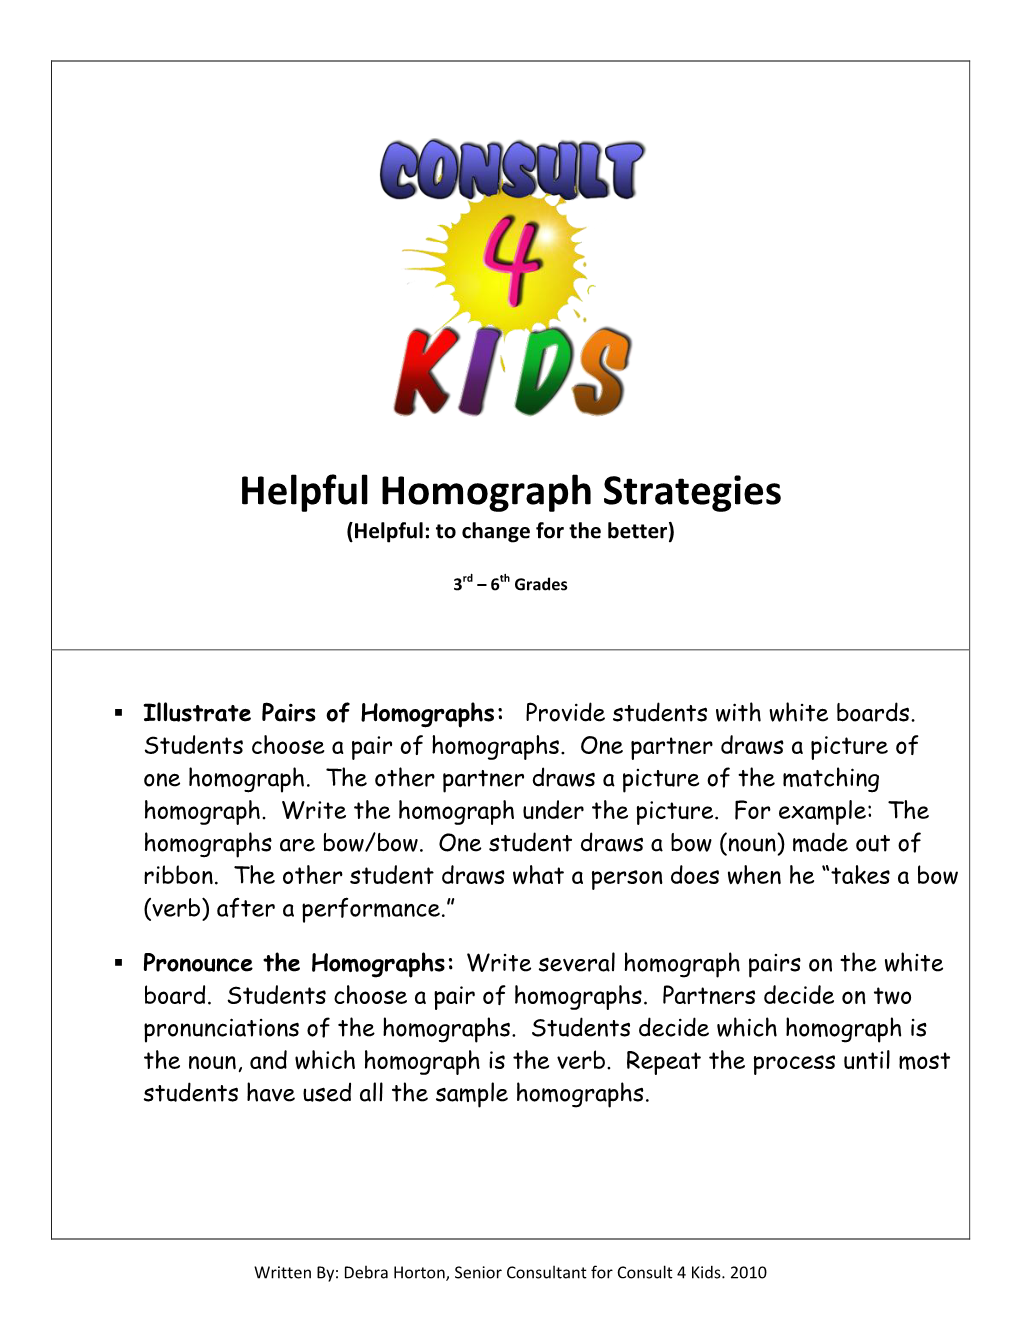 Helpful Homograph Strategies (Helpful: to Change for the Better)